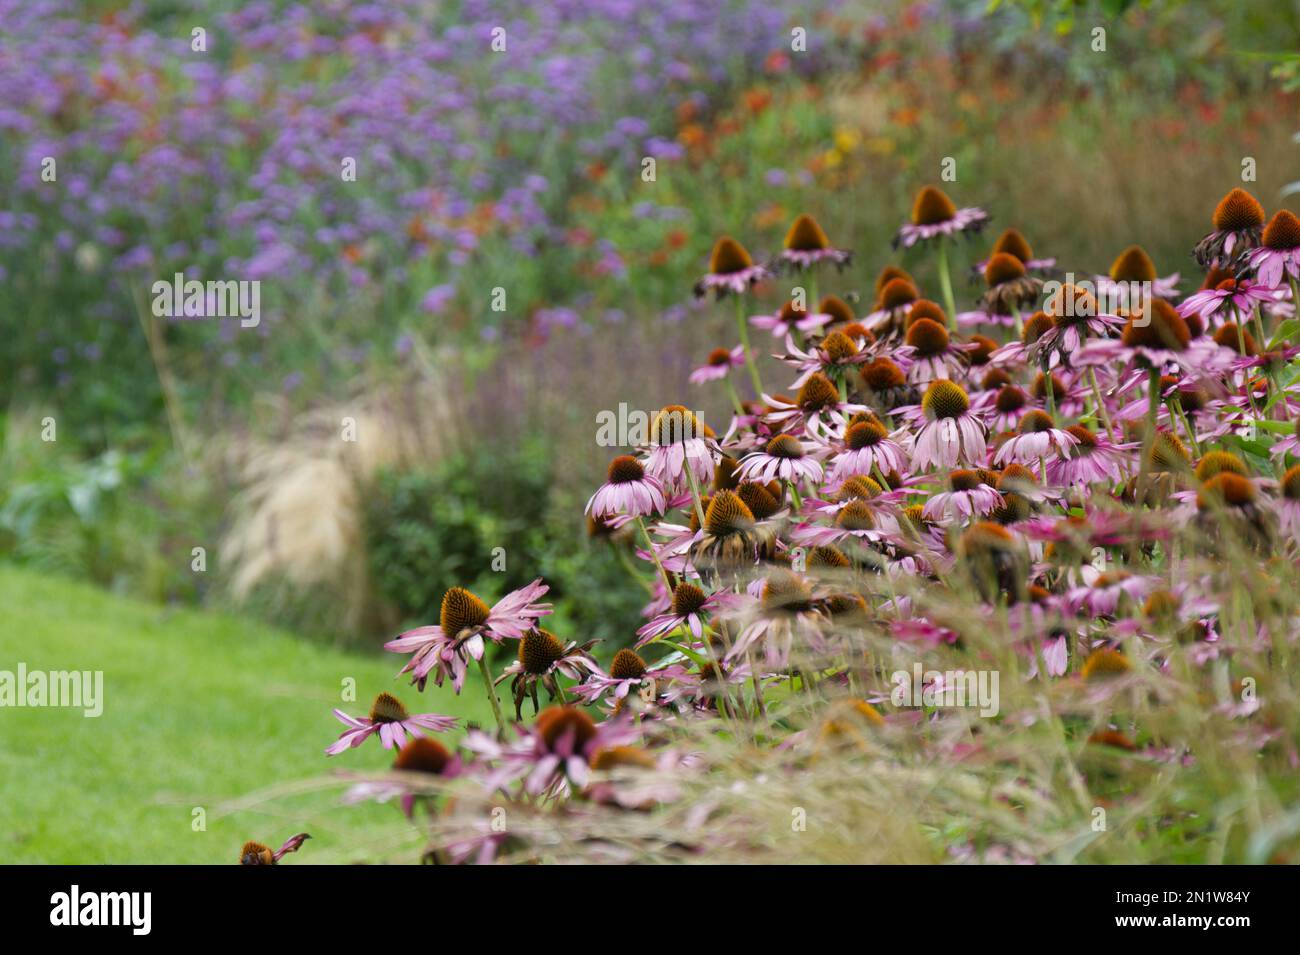 An autumn display of grasses and echinacea purpurea, or purple coneflower, in front of a herbaceous border in a UK garden September Stock Photo